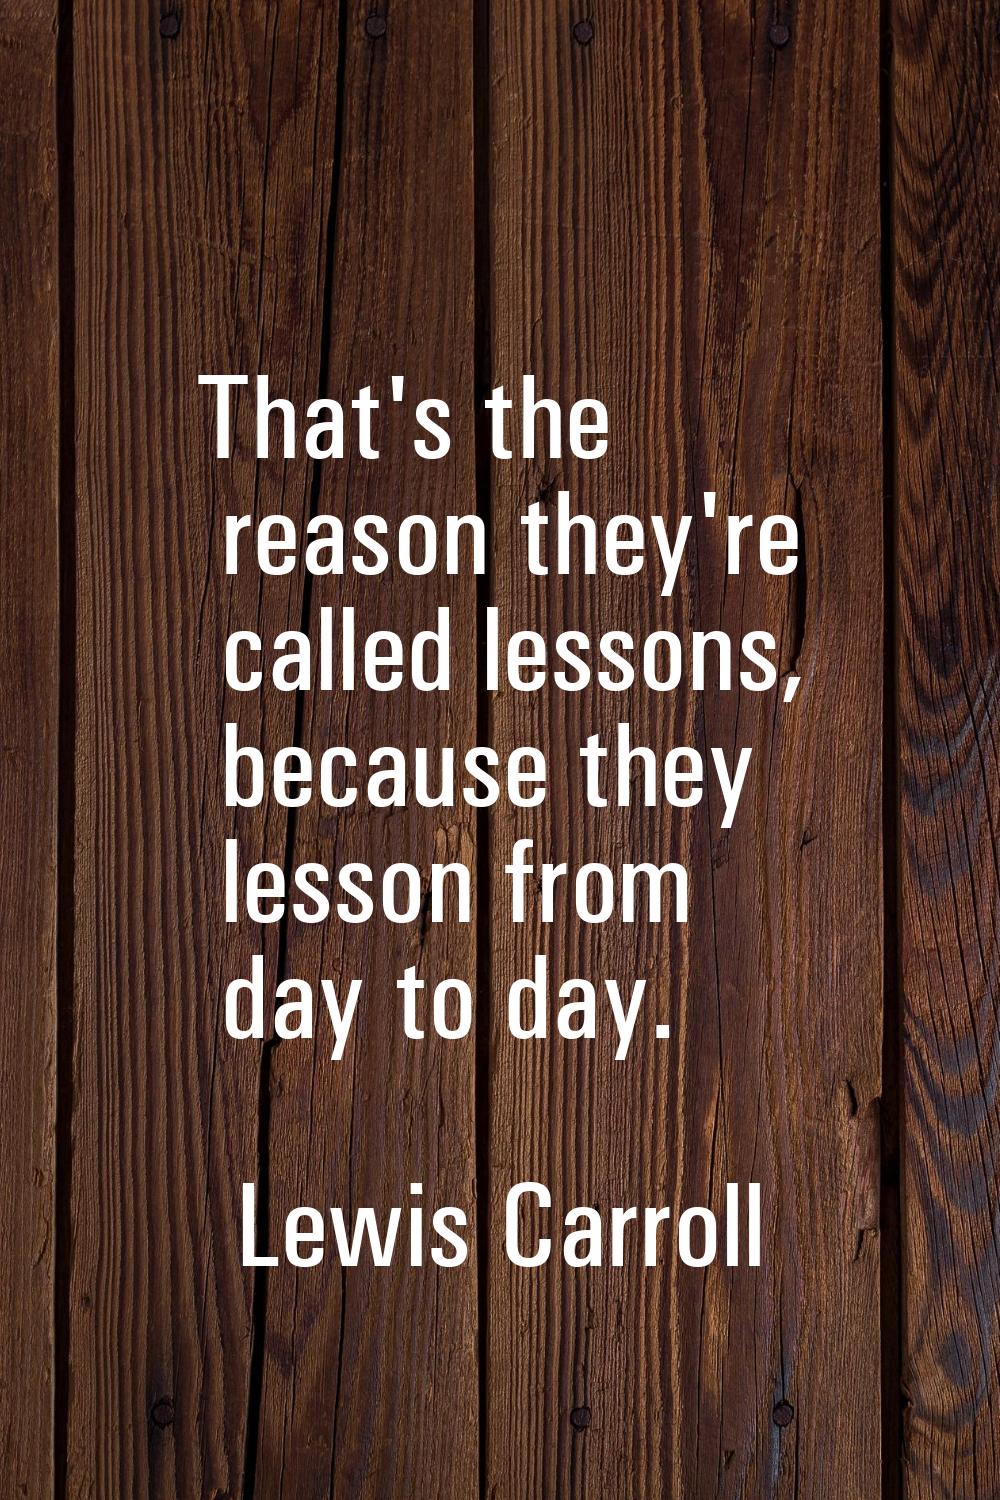 That's the reason they're called lessons, because they lesson from day to day.